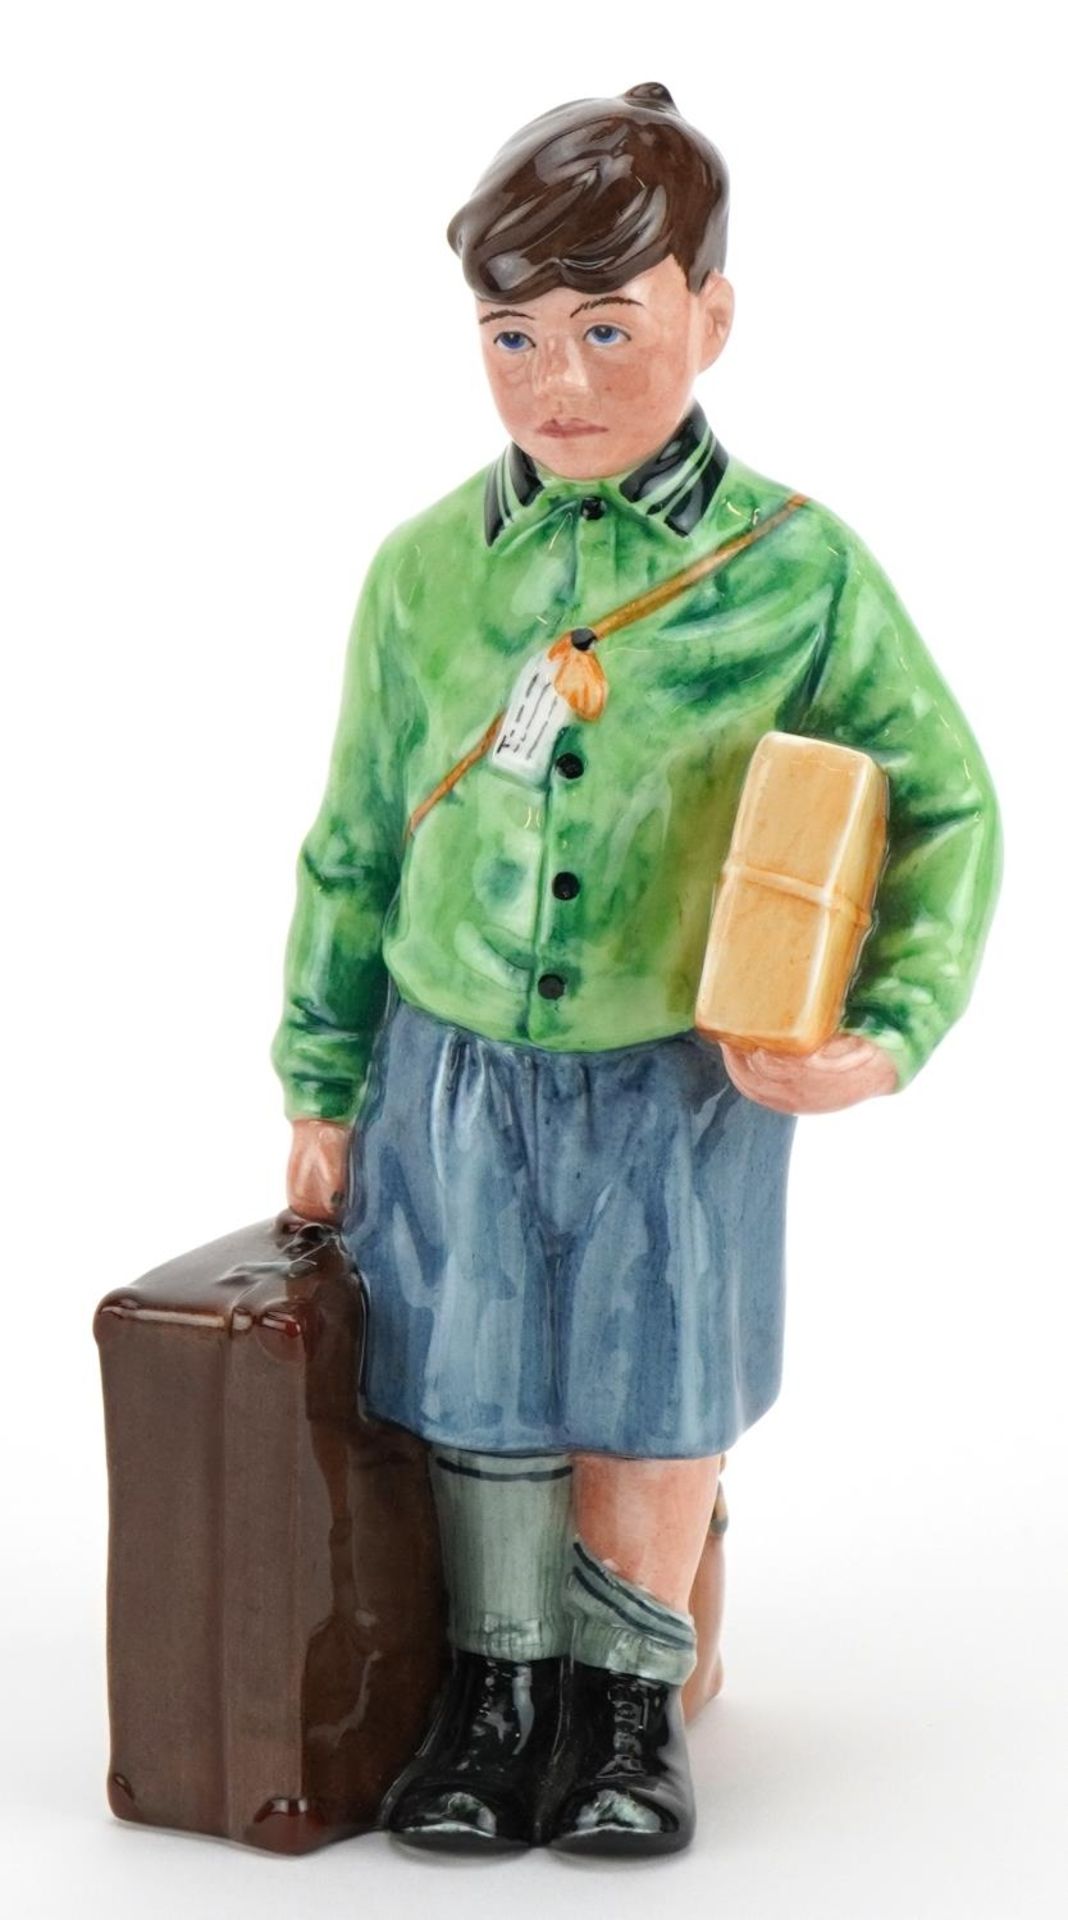 Royal Doulton Children of the Blitz figure with certificate, The Boy Evacuee HN3202, limited edition